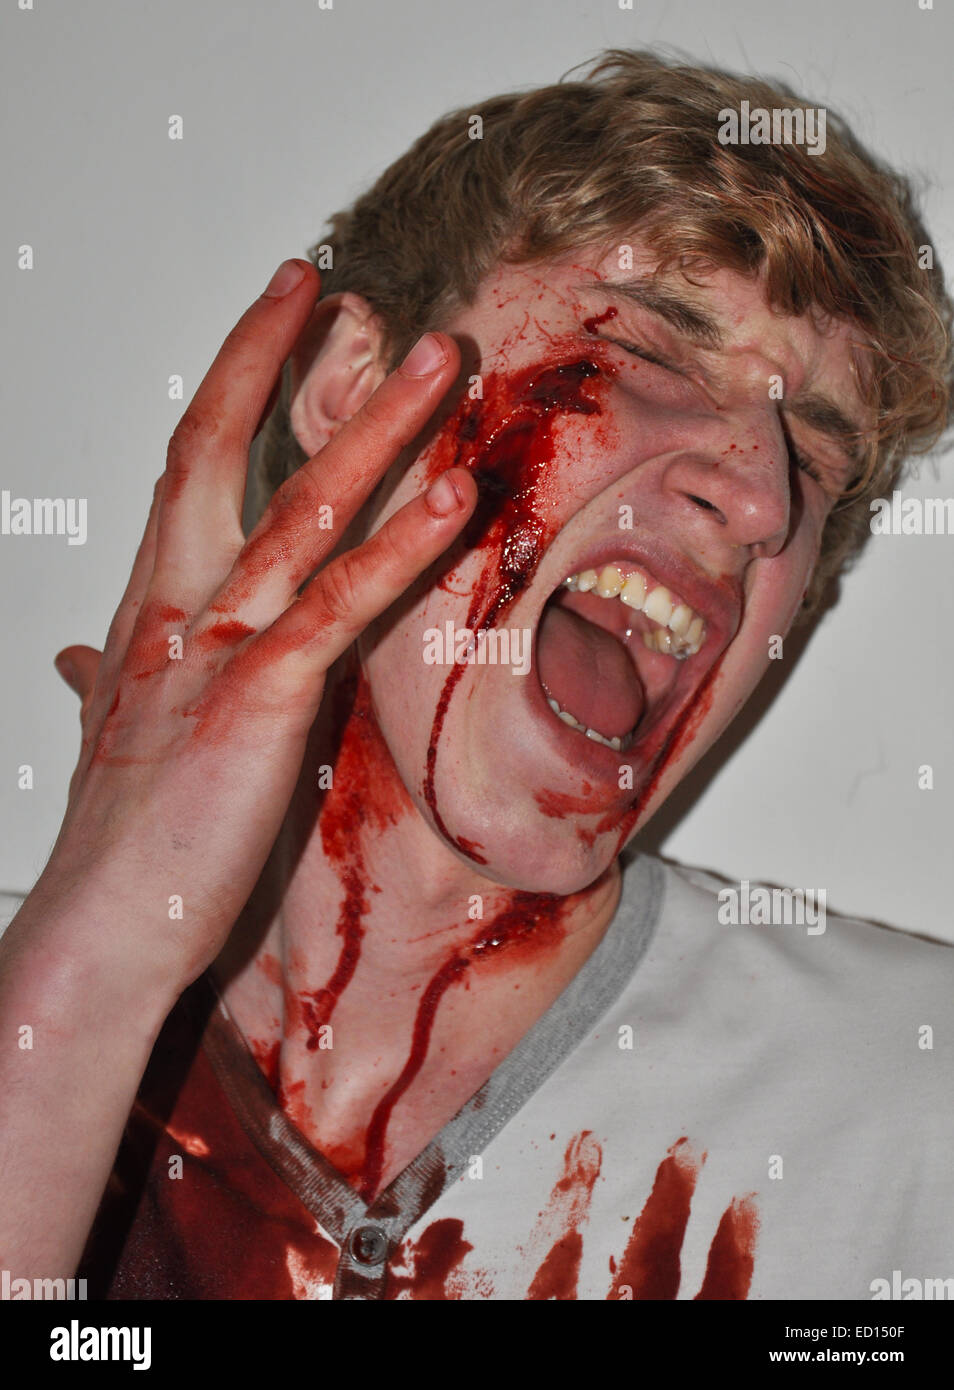 Young teenage boy screaming in pain with blood prosthetics over face Stock Photo